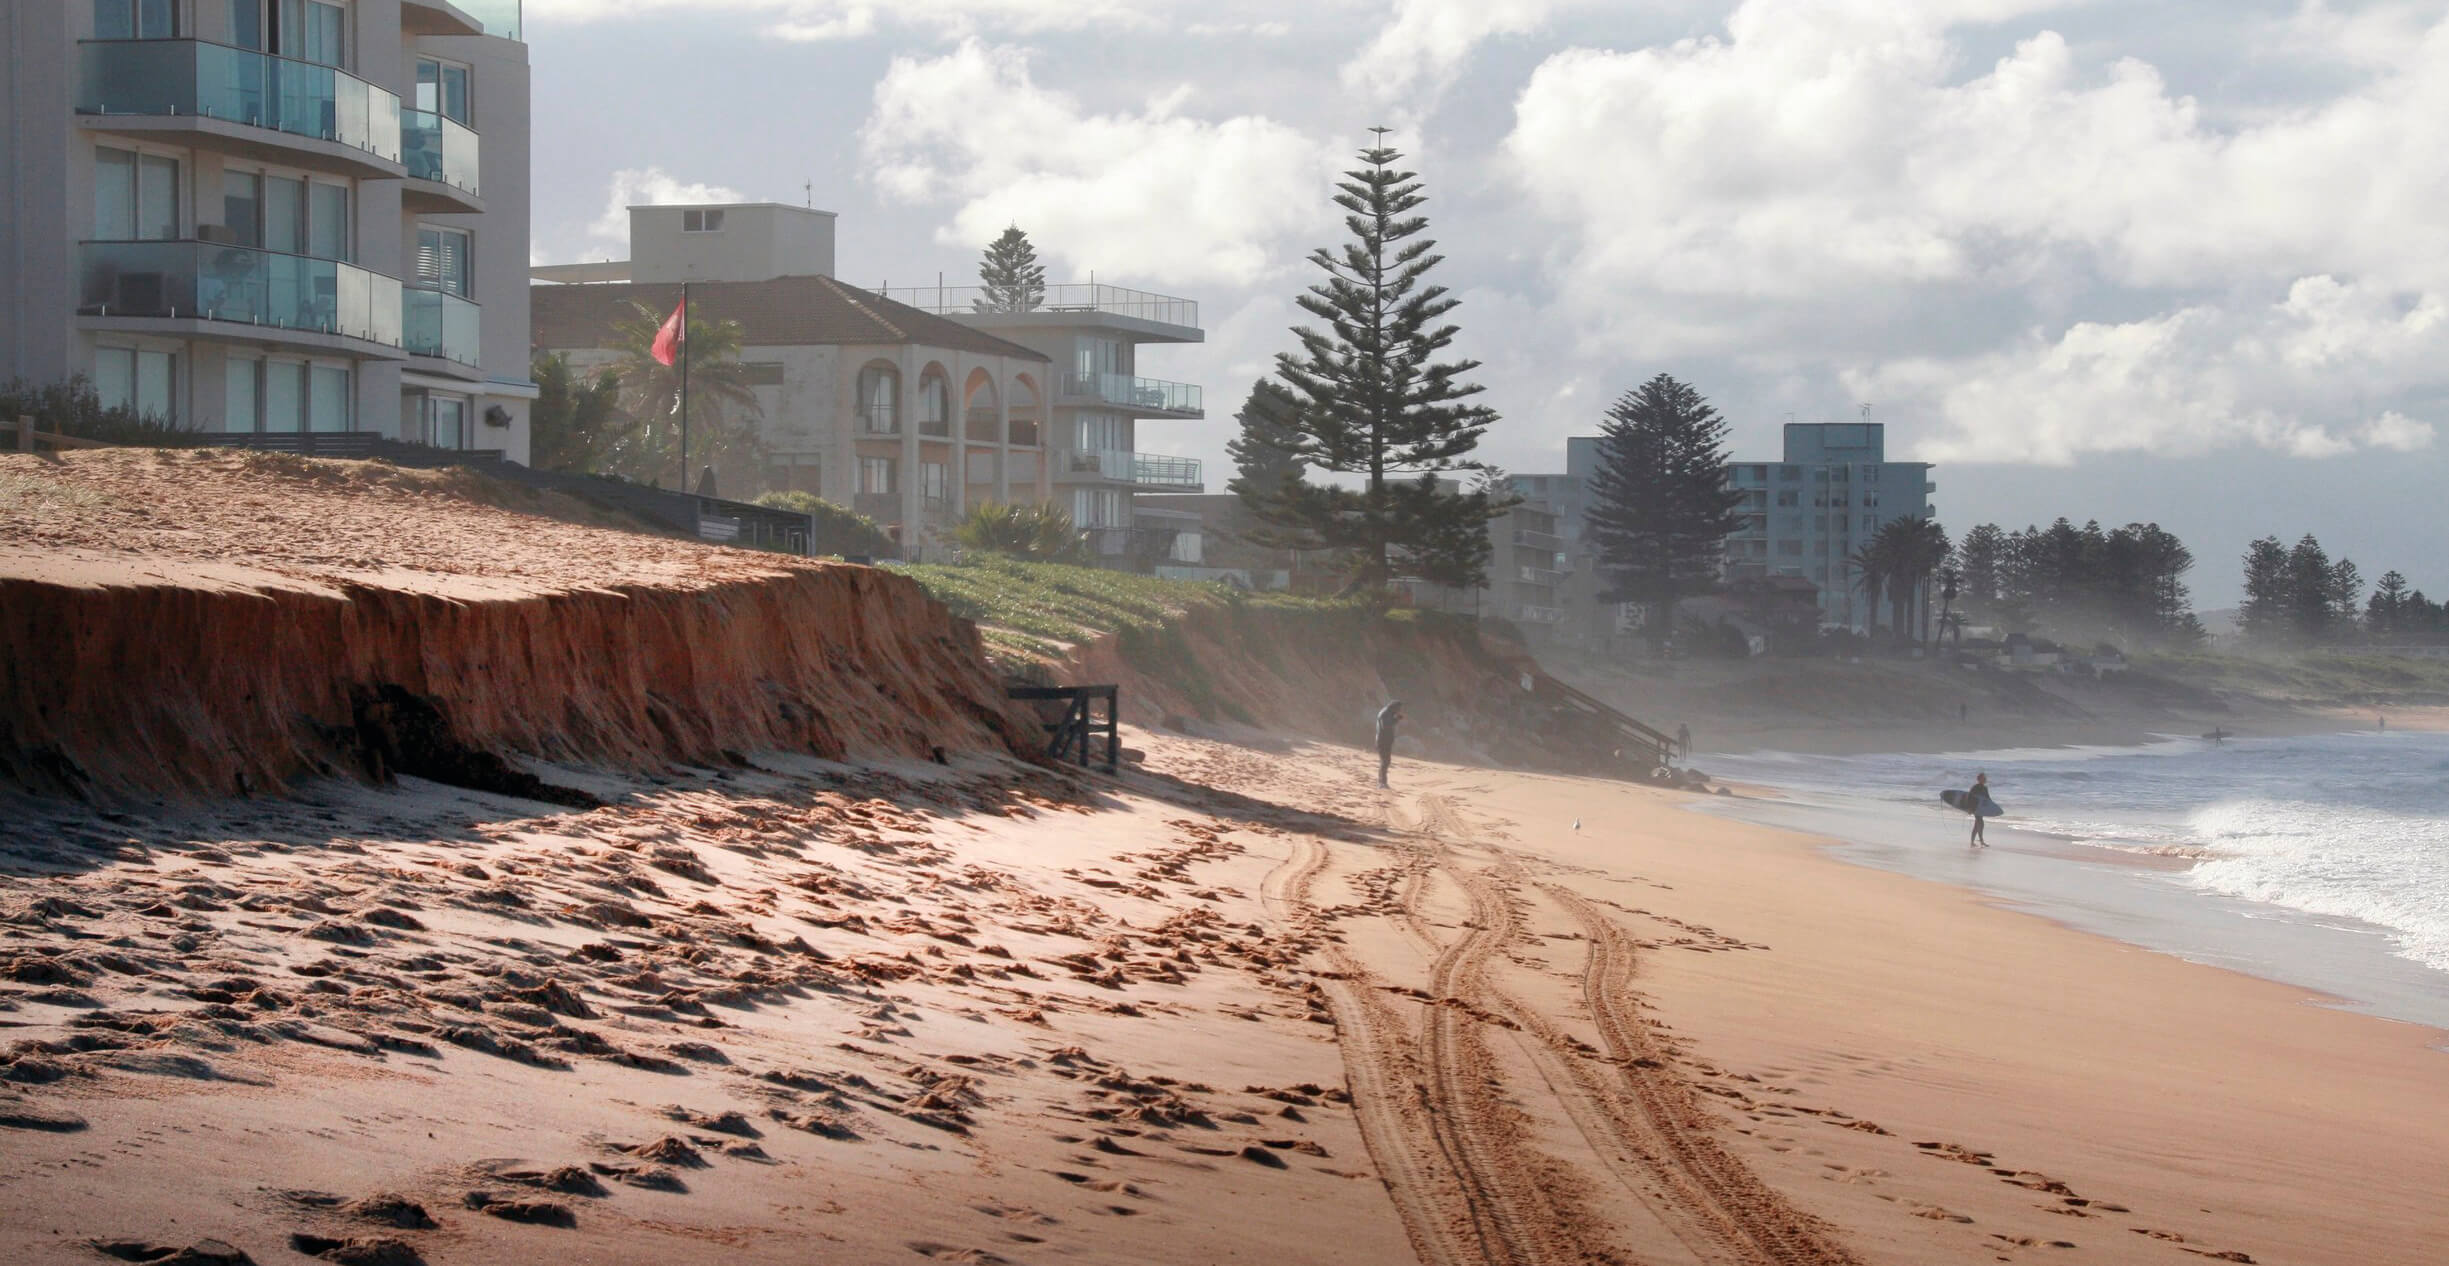 Beach erosion close to habitations in stormy weather